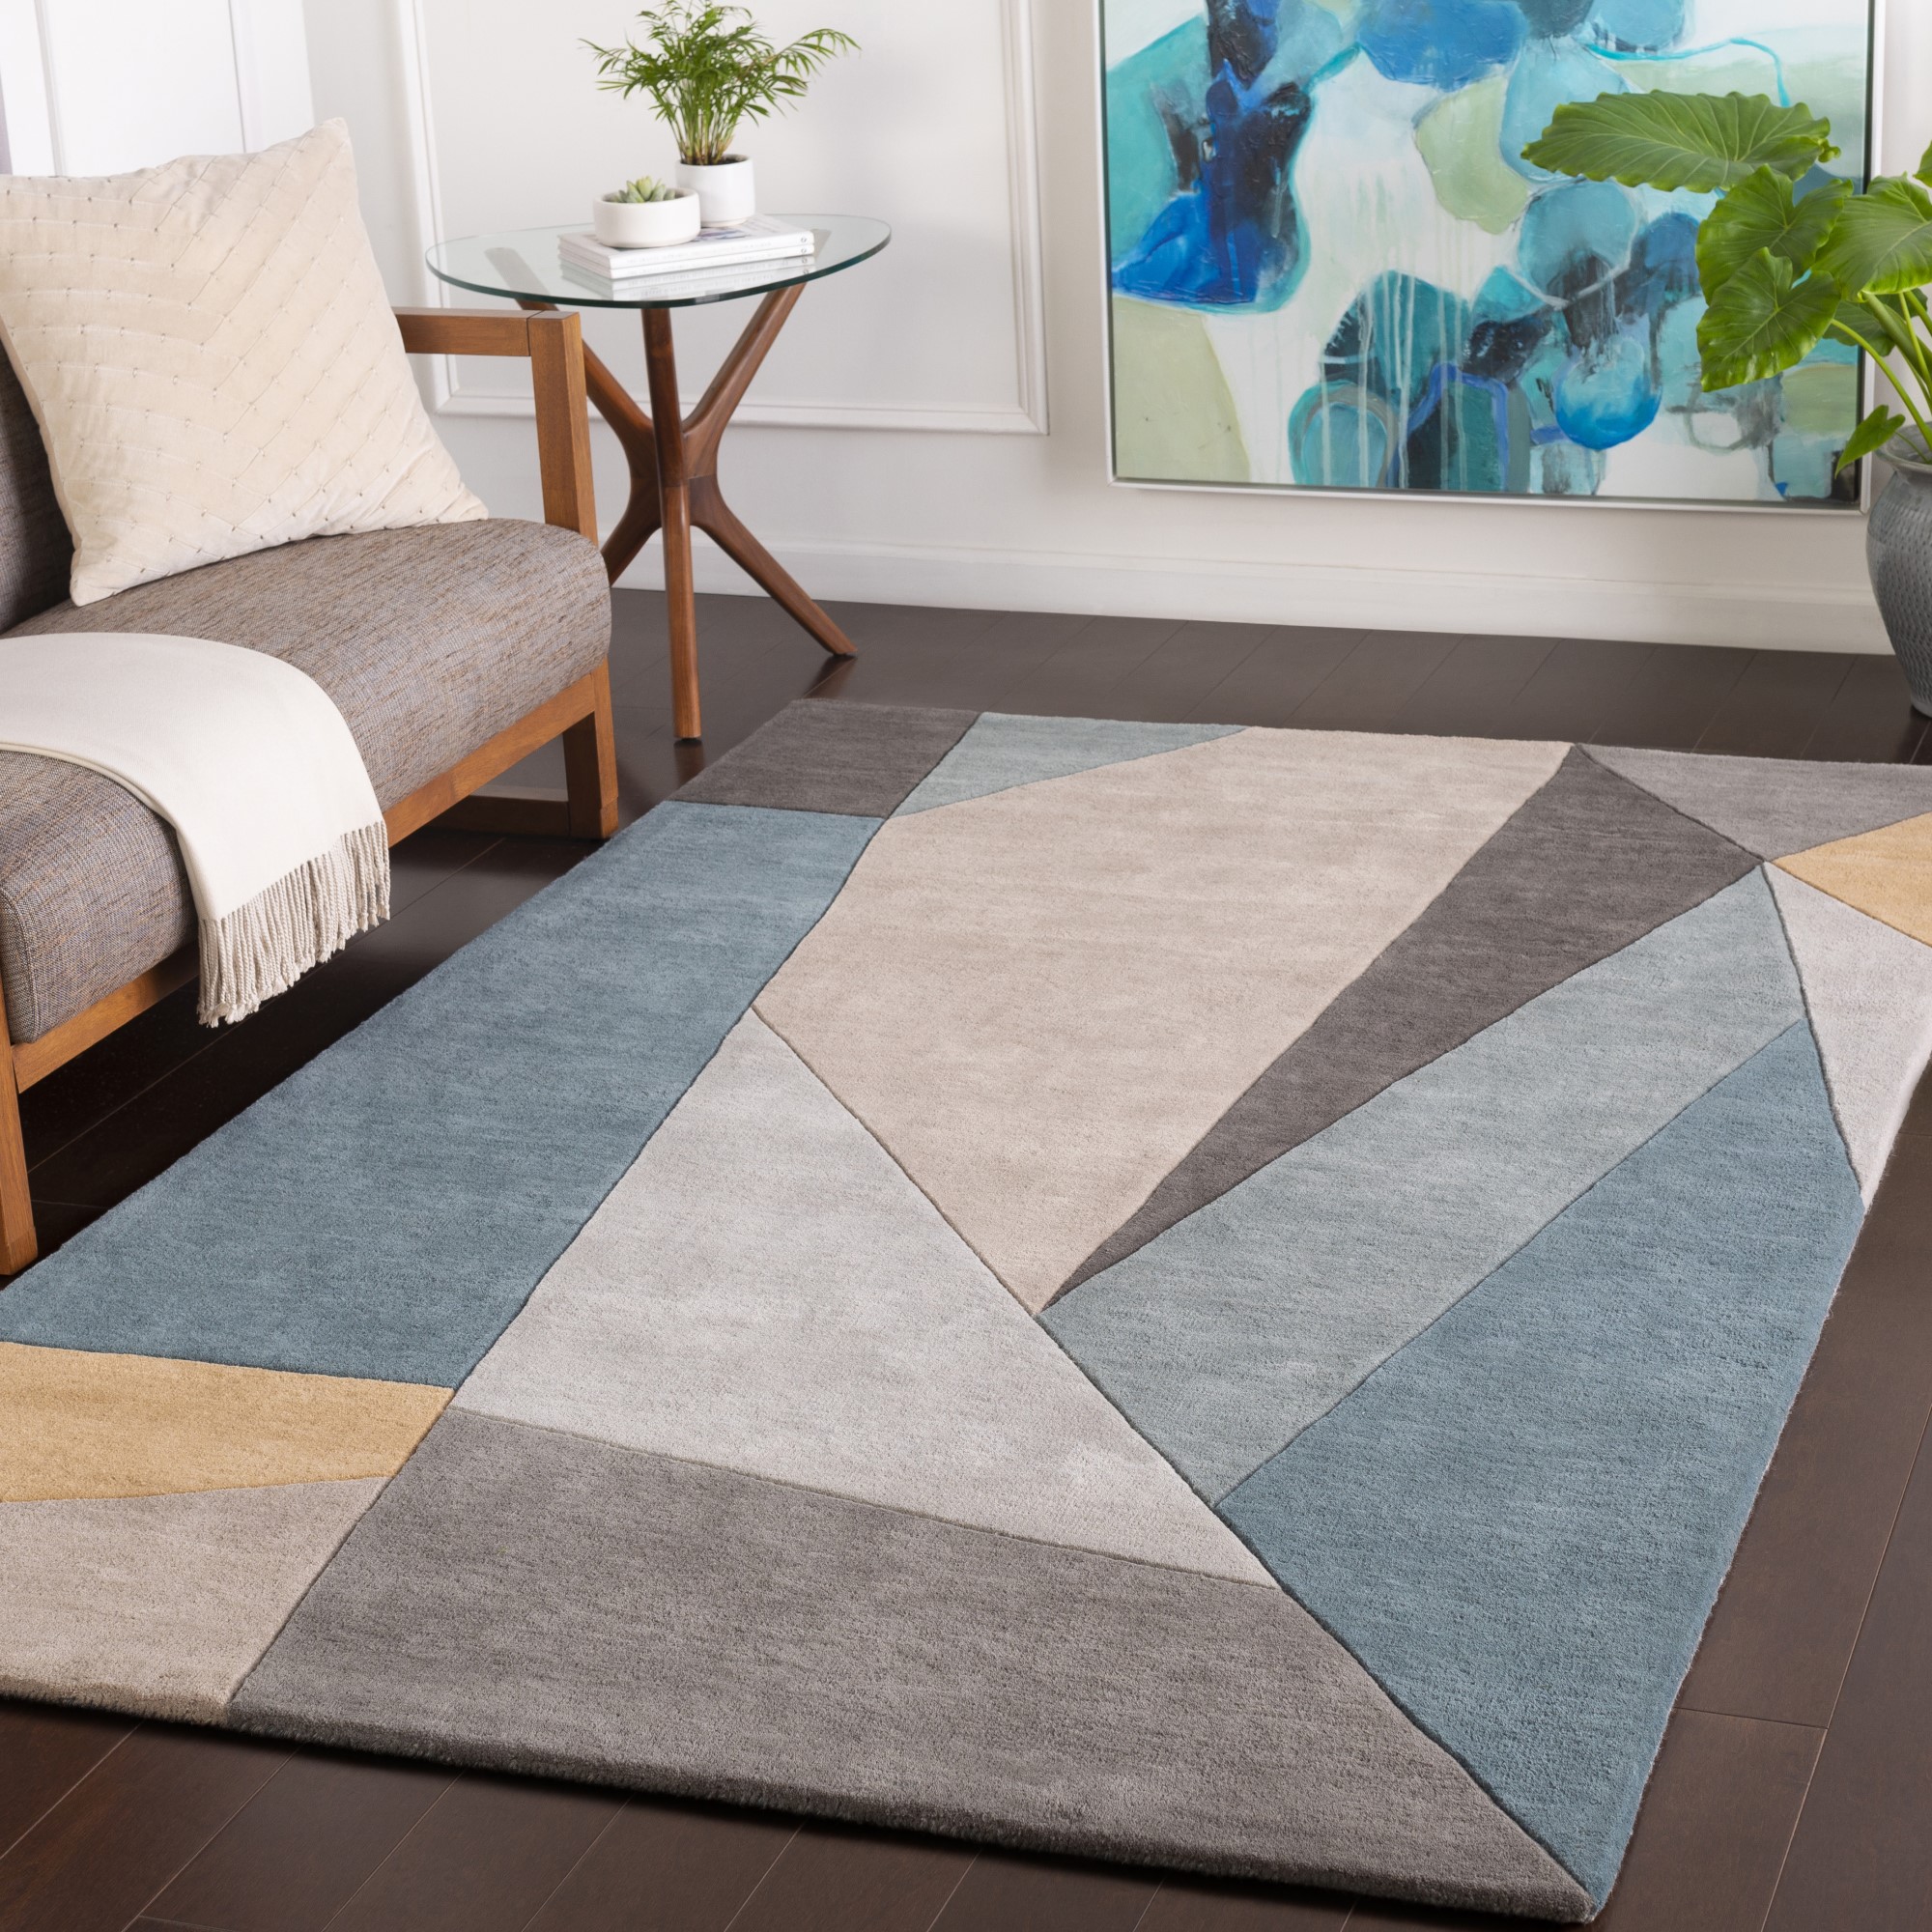 Modern Bright Yellow & Grey Carved Geometric Area Rugs Budget Bedroom Lounge Rug 